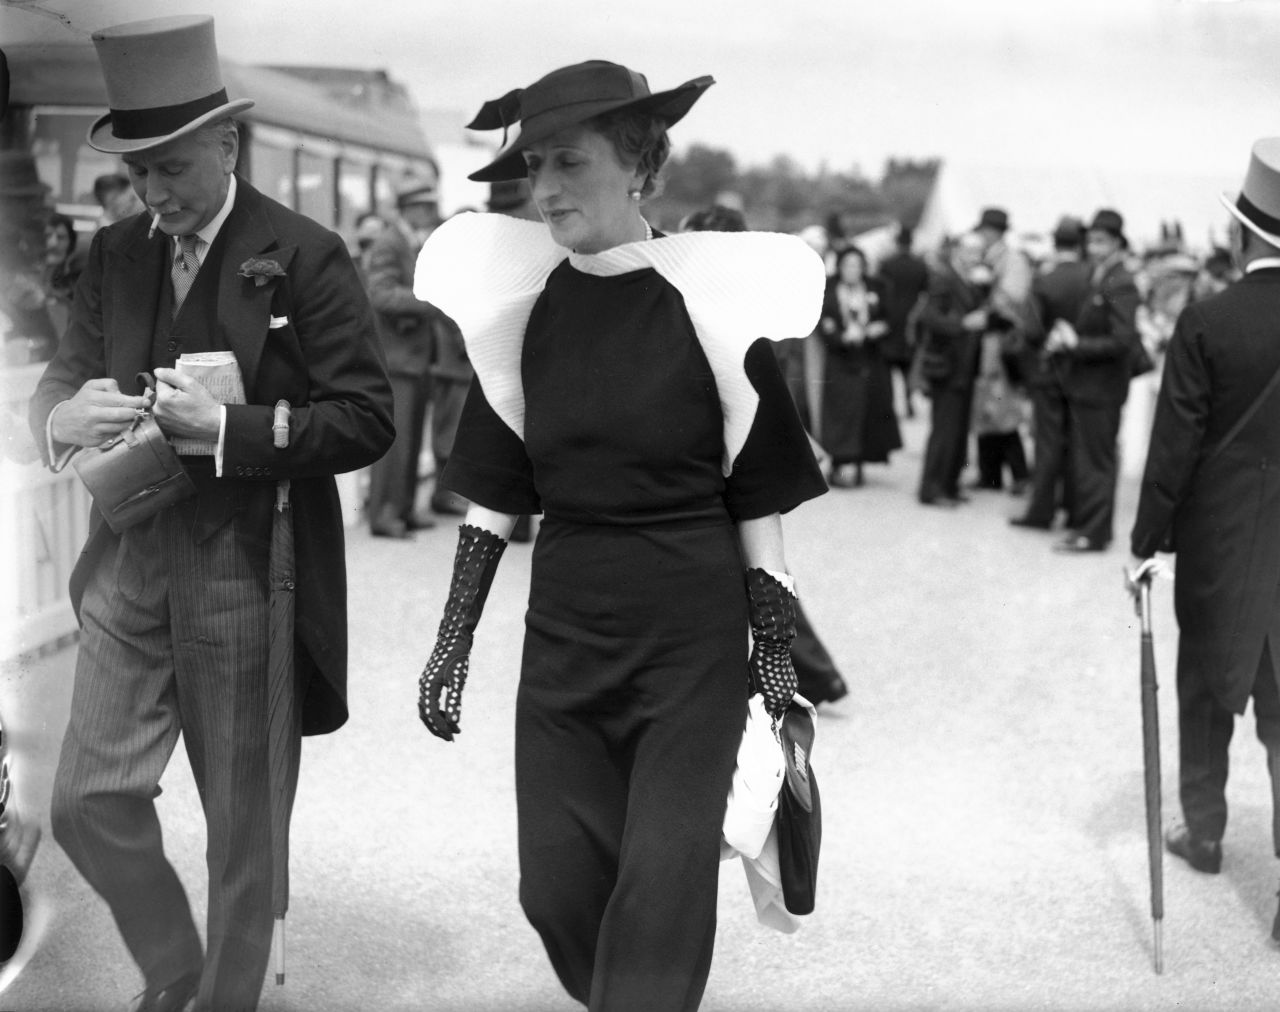 This woman wearing a black trouser suit to the 1936 Royal Ascot races was truly ahead of her time: Trouser suits weren't officially recognized as Ascot-appropriate until the 1970s.